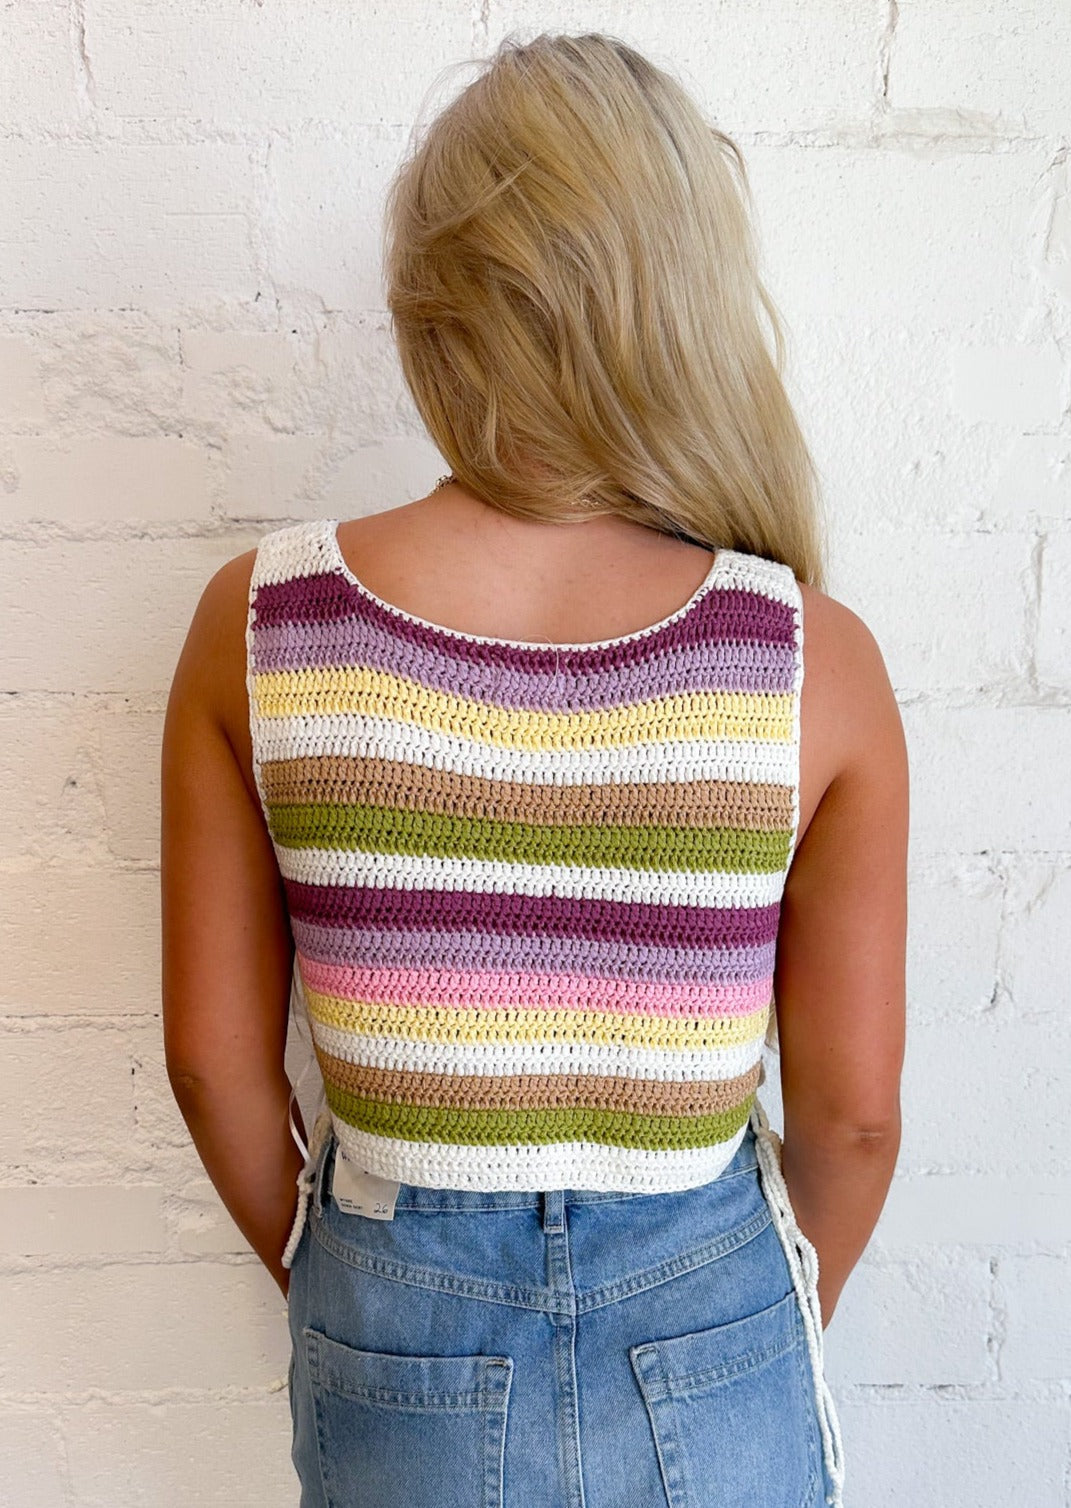 Kimberly Crochet Top, Tops, Adeline, Adeline, dallas boutique, dallas texas, texas boutique, women's boutique dallas, adeline boutique, dallas boutique, trendy boutique, affordable boutique